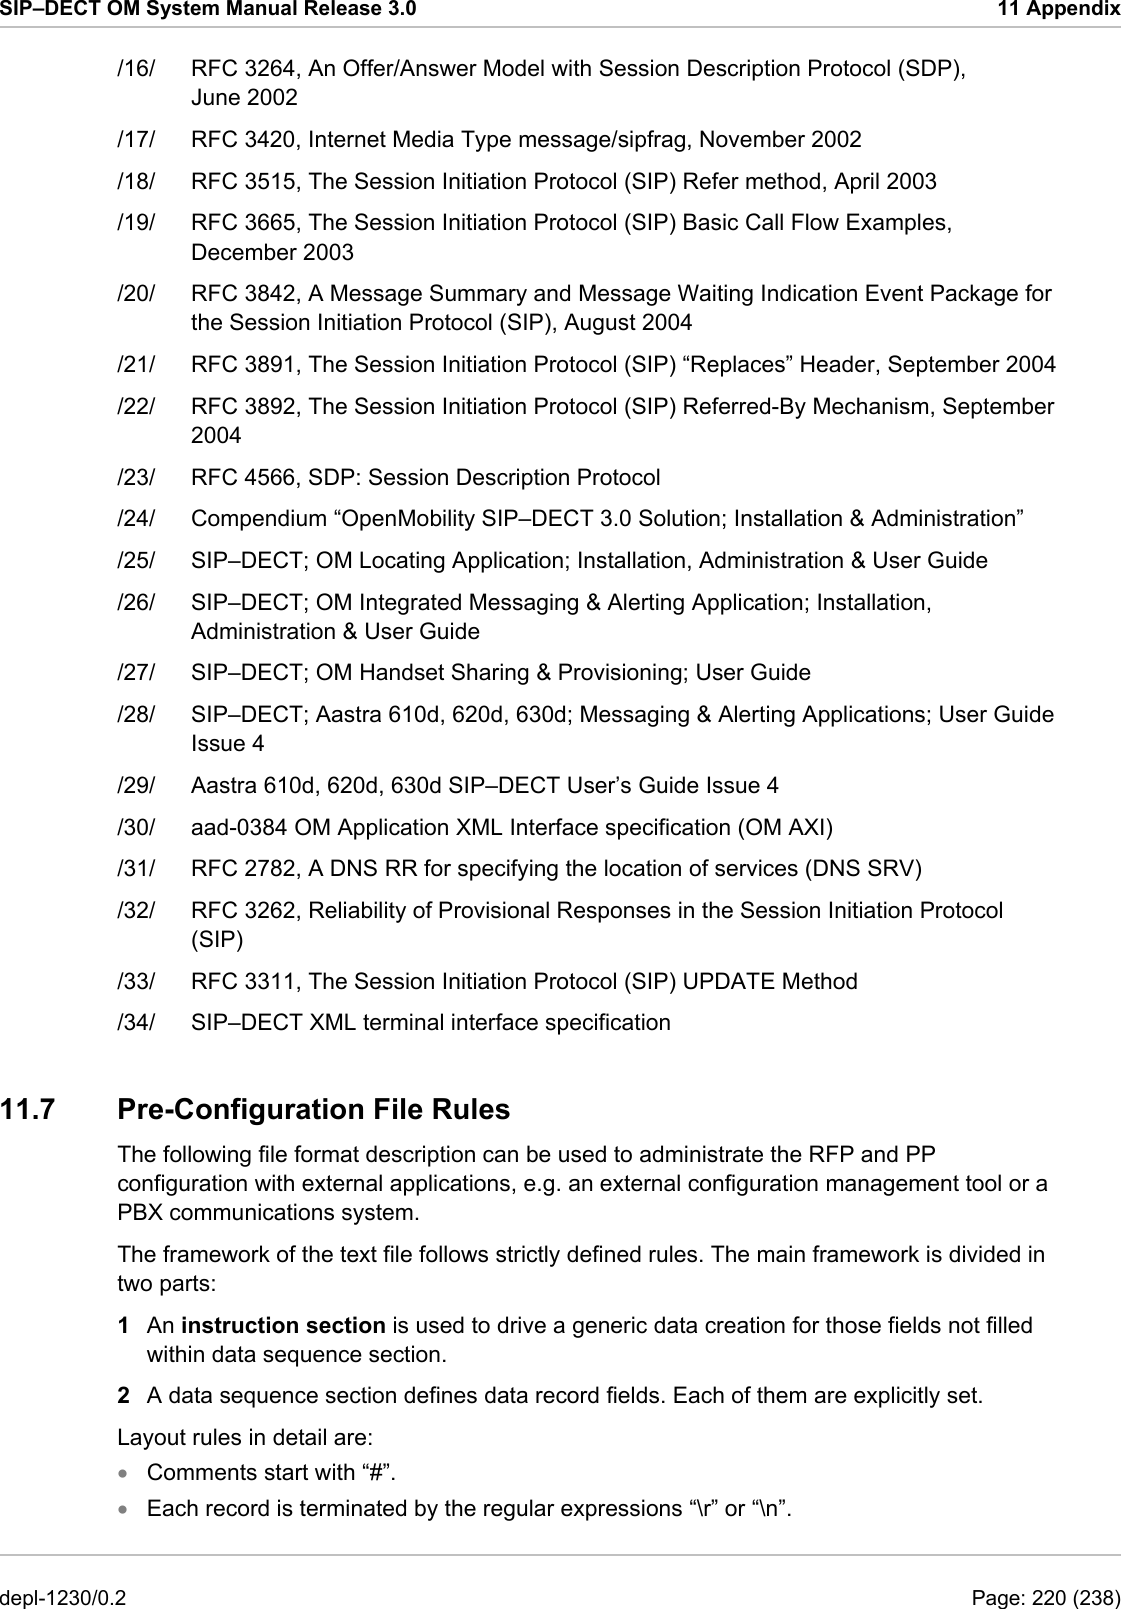 SIP–DECT OM System Manual Release 3.0  11 Appendix /16/  RFC 3264, An Offer/Answer Model with Session Description Protocol (SDP), June 2002 /17/  RFC 3420, Internet Media Type message/sipfrag, November 2002 /18/  RFC 3515, The Session Initiation Protocol (SIP) Refer method, April 2003 /19/  RFC 3665, The Session Initiation Protocol (SIP) Basic Call Flow Examples, December 2003 /20/  RFC 3842, A Message Summary and Message Waiting Indication Event Package for the Session Initiation Protocol (SIP), August 2004 /21/  RFC 3891, The Session Initiation Protocol (SIP) “Replaces” Header, September 2004 /22/  RFC 3892, The Session Initiation Protocol (SIP) Referred-By Mechanism, September 2004 /23/  RFC 4566, SDP: Session Description Protocol /24/  Compendium “OpenMobility SIP–DECT 3.0 Solution; Installation &amp; Administration” /25/  SIP–DECT; OM Locating Application; Installation, Administration &amp; User Guide /26/  SIP–DECT; OM Integrated Messaging &amp; Alerting Application; Installation, Administration &amp; User Guide /27/  SIP–DECT; OM Handset Sharing &amp; Provisioning; User Guide /28/  SIP–DECT; Aastra 610d, 620d, 630d; Messaging &amp; Alerting Applications; User Guide Issue 4 /29/  Aastra 610d, 620d, 630d SIP–DECT User’s Guide Issue 4 /30/  aad-0384 OM Application XML Interface specification (OM AXI) /31/  RFC 2782, A DNS RR for specifying the location of services (DNS SRV) /32/  RFC 3262, Reliability of Provisional Responses in the Session Initiation Protocol (SIP) /33/  RFC 3311, The Session Initiation Protocol (SIP) UPDATE Method /34/  SIP–DECT XML terminal interface specification 11.7  Pre-Configuration File Rules  The following file format description can be used to administrate the RFP and PP configuration with external applications, e.g. an external configuration management tool or a PBX communications system. The framework of the text file follows strictly defined rules. The main framework is divided in two parts: 1  An instruction section is used to drive a generic data creation for those fields not filled within data sequence section.  2  A data sequence section defines data record fields. Each of them are explicitly set. Layout rules in detail are: Comments start with “#”. • •  Each record is terminated by the regular expressions “\r” or “\n”. depl-1230/0.2  Page: 220 (238) 